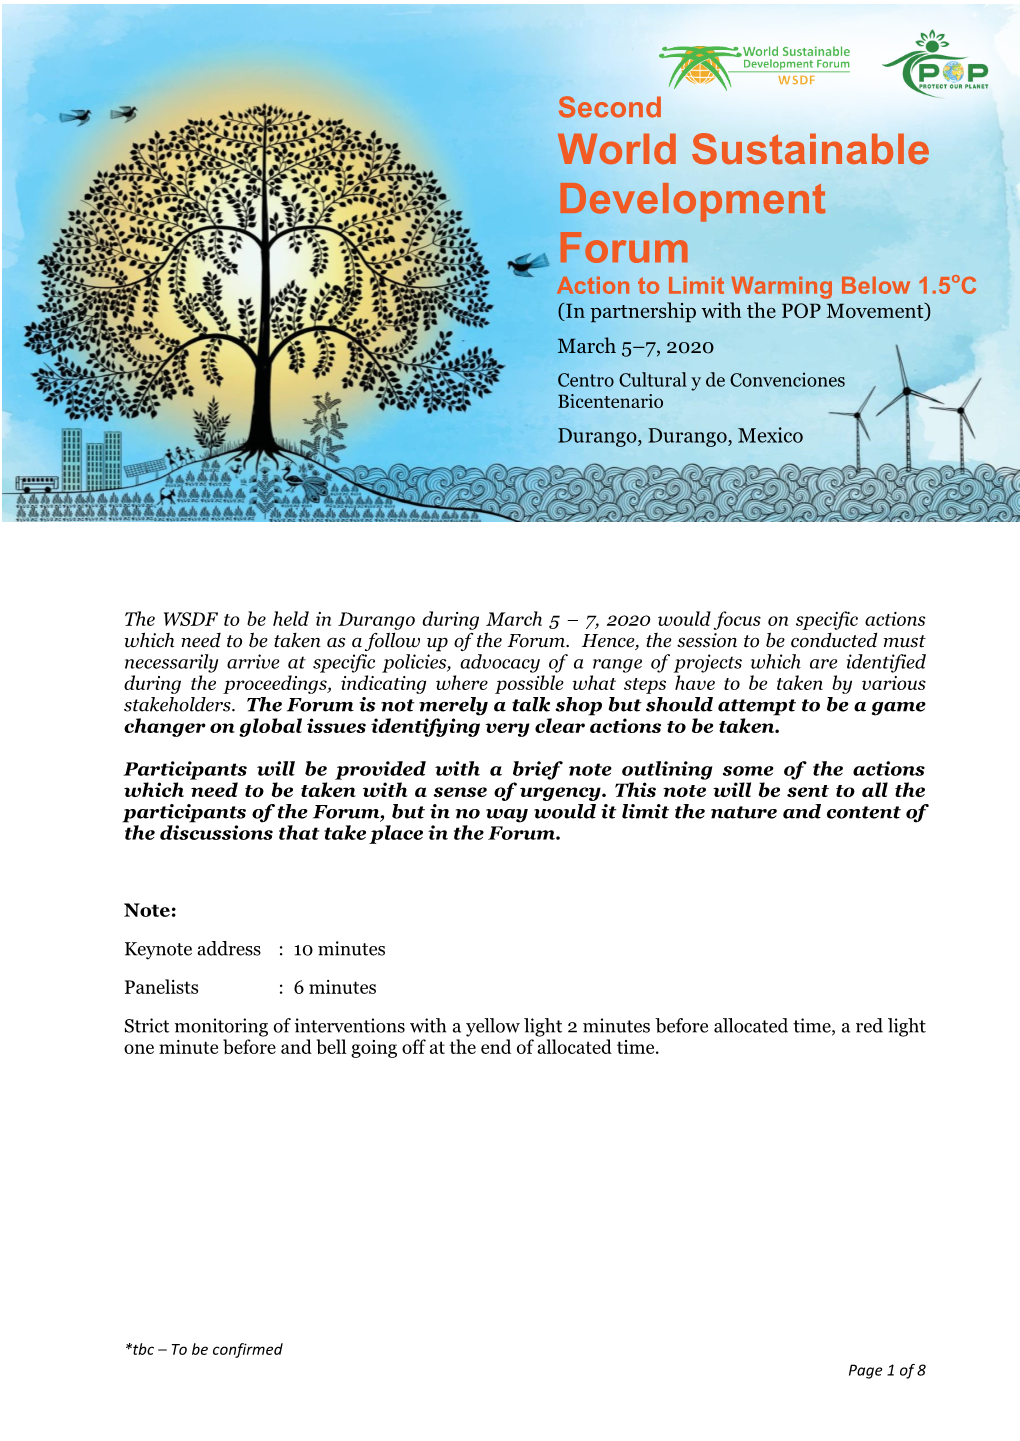 Second World Sustainable Development Forum Action to Limit Warming Below 1.5Oc (In Partnership with the POP Movement)